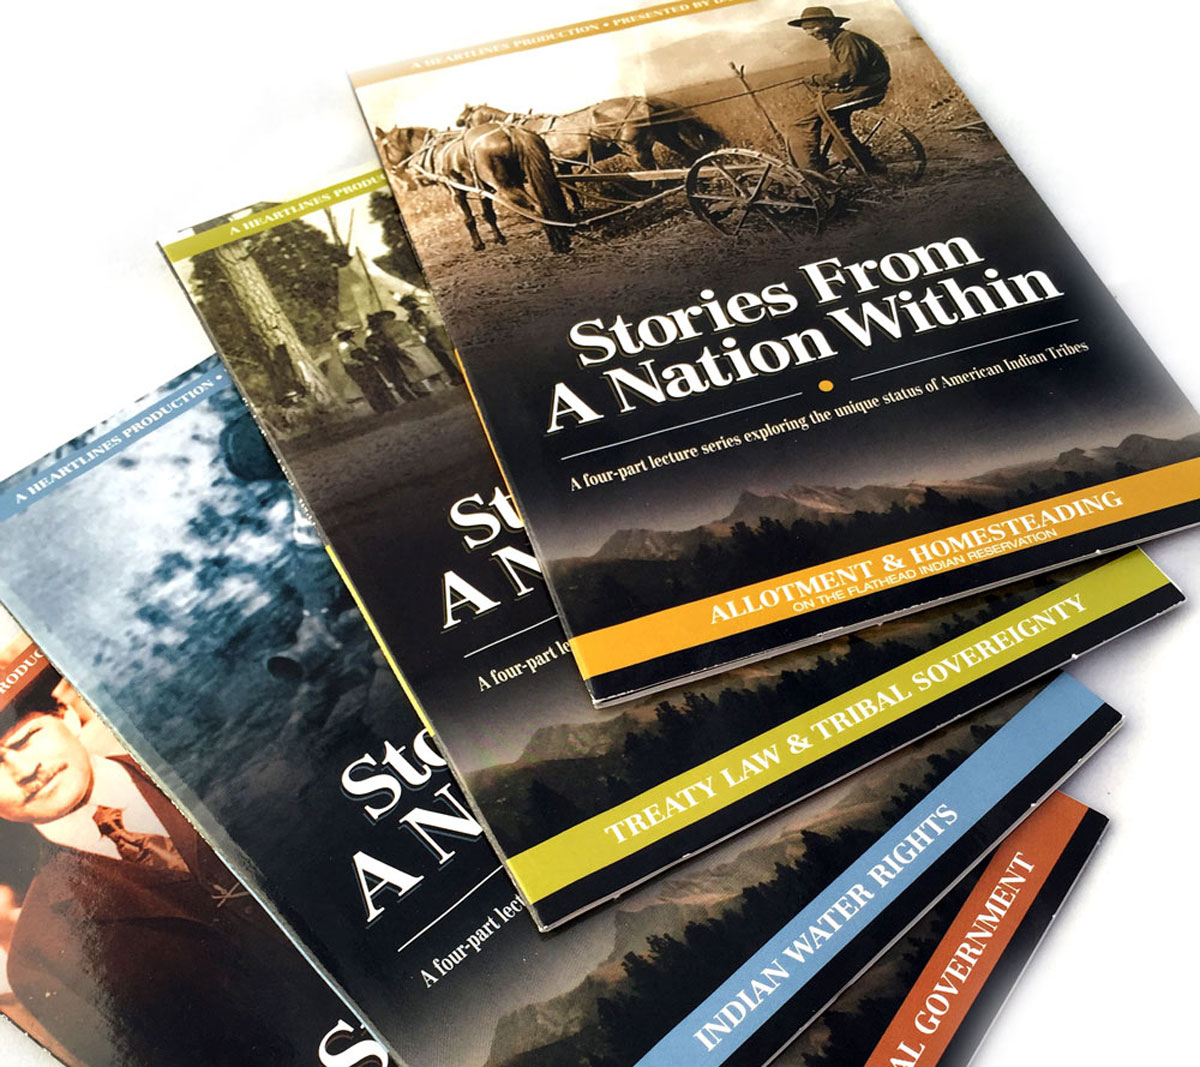 Julie-Cajune-Heartlines-Stories-From-A-Nation-Within-DVD-Package-Design